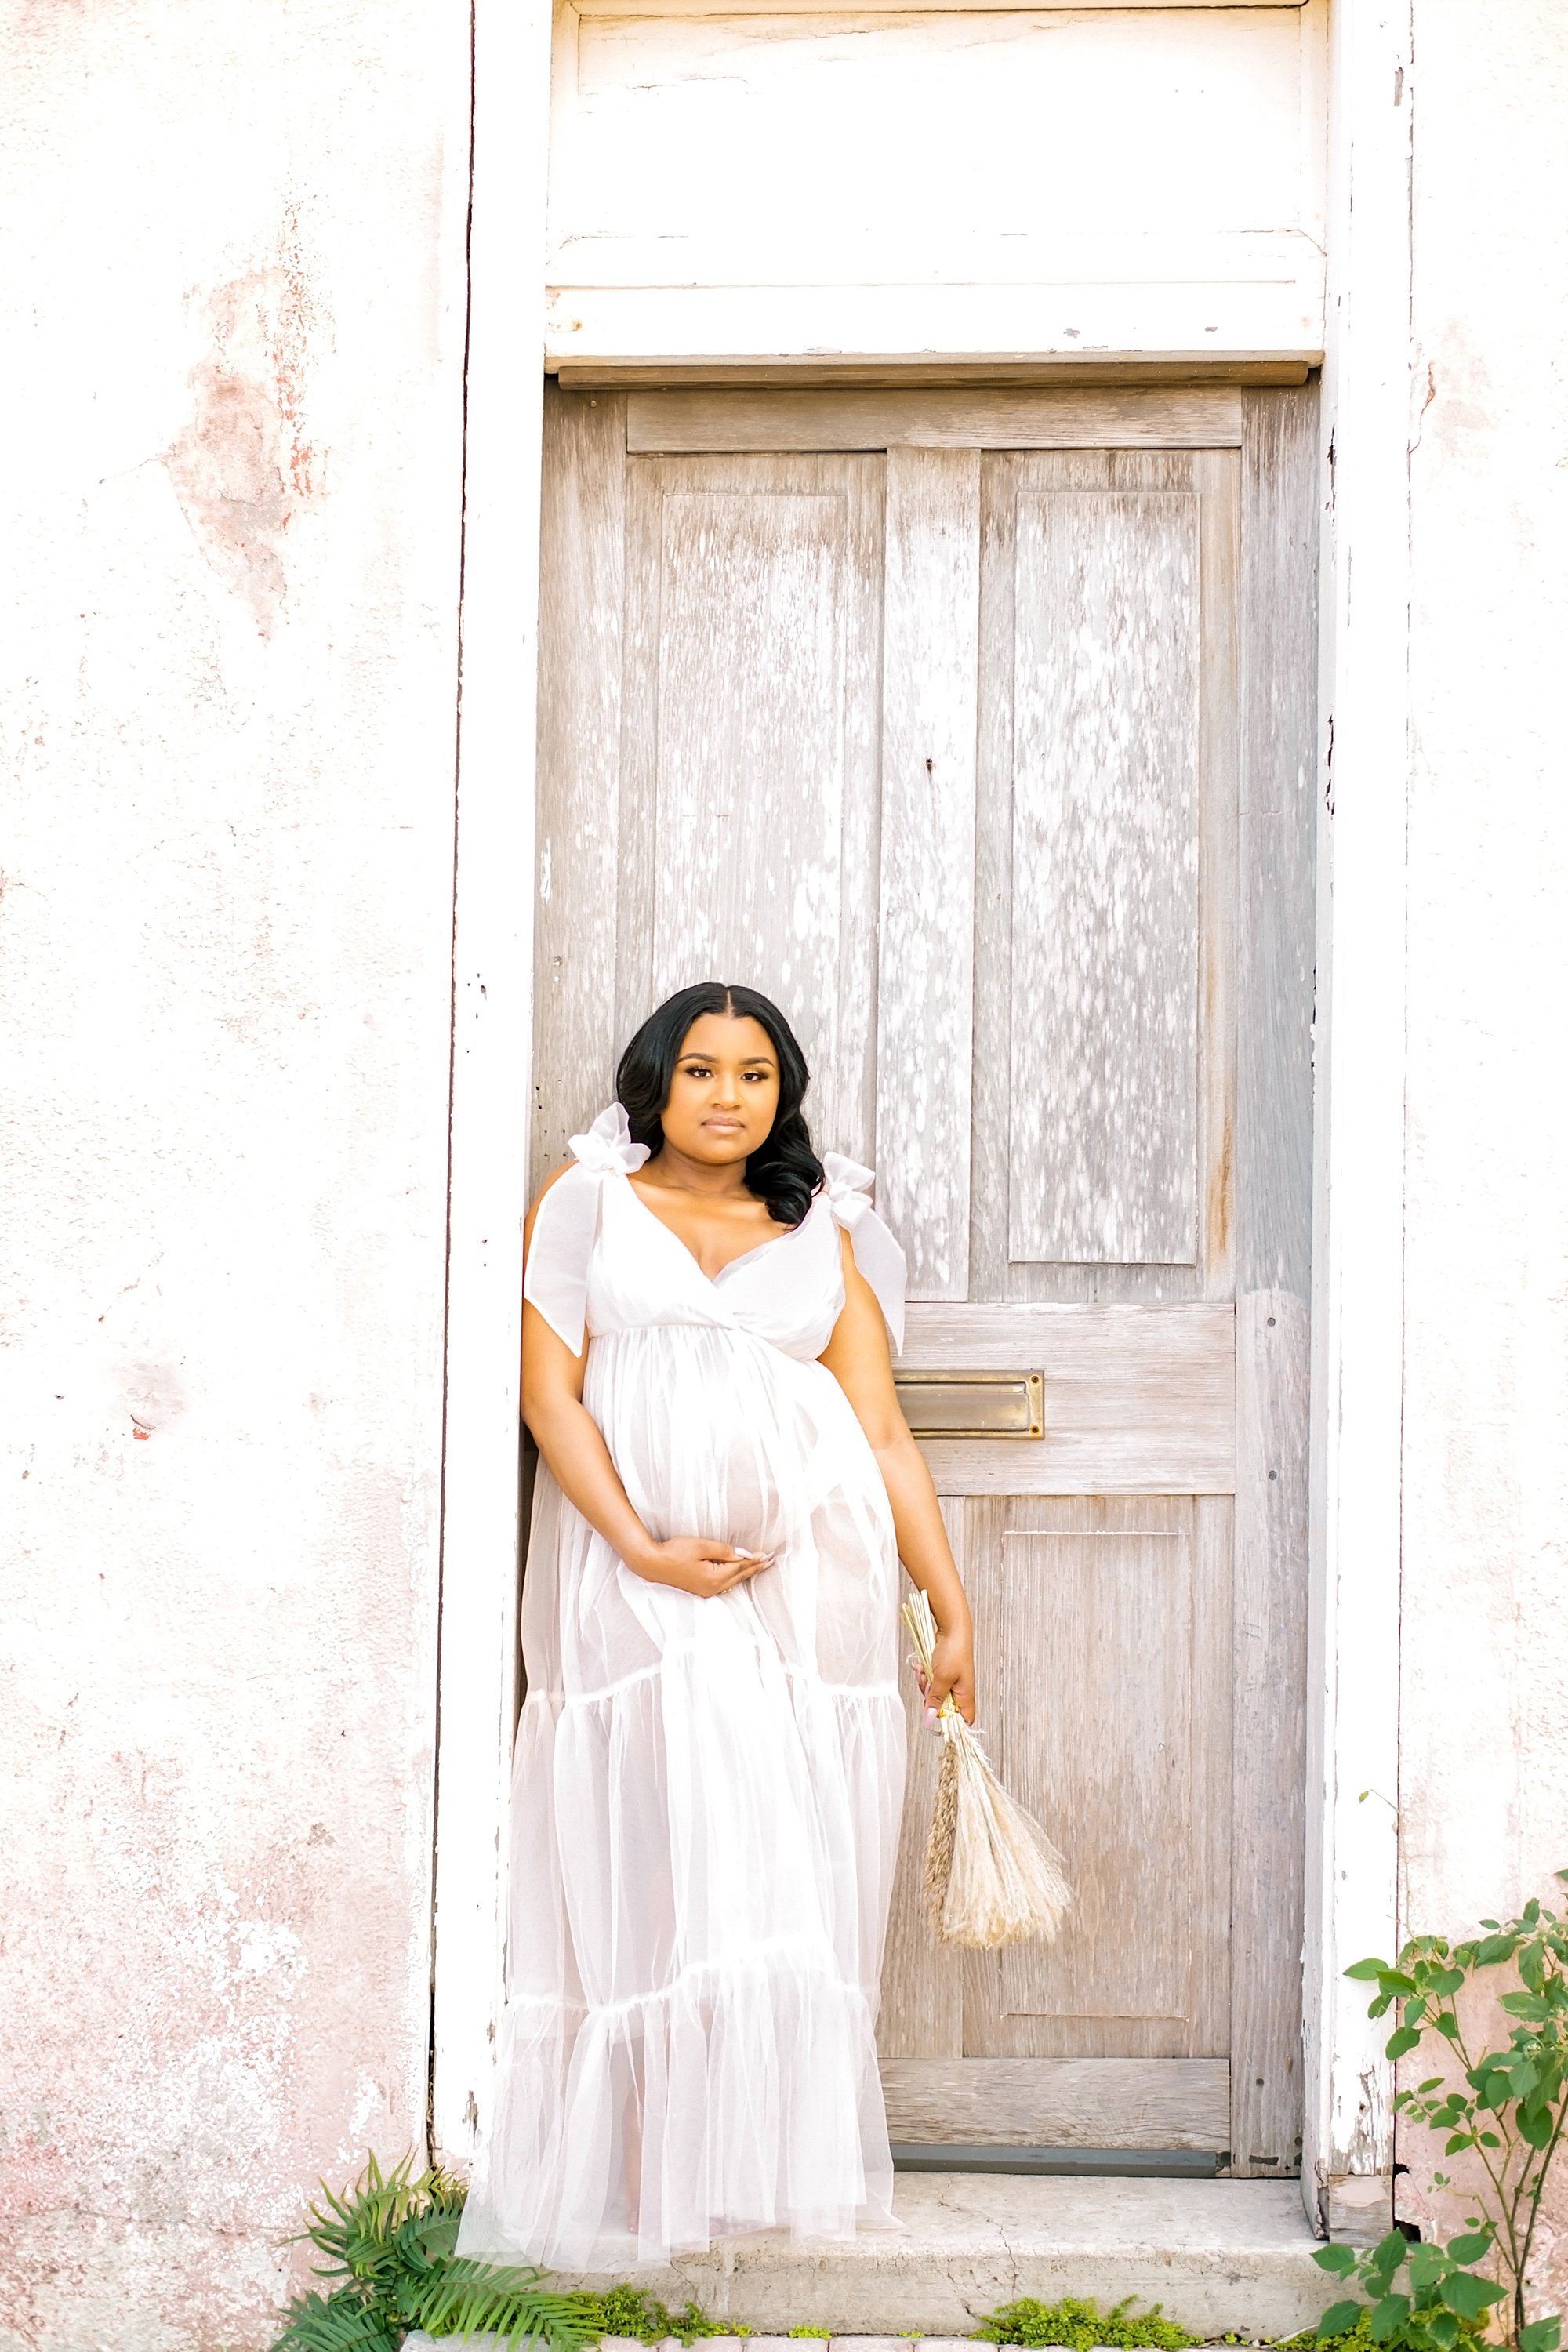 French Quarter Engagement Shoot-New Orleans French Quarter-New Orleans Photographer_0694.jpg